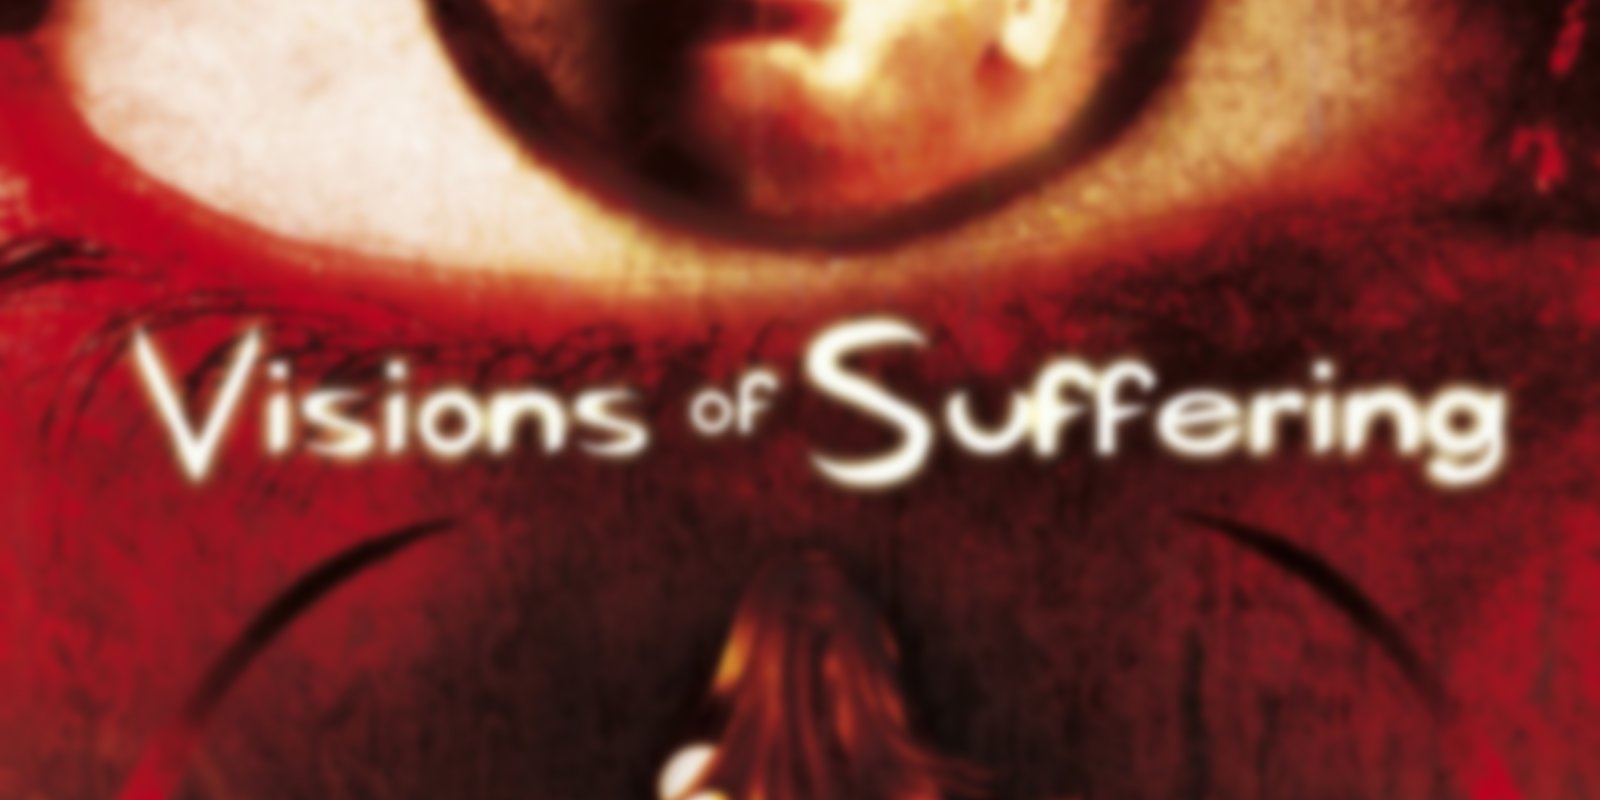 Visions of Suffering